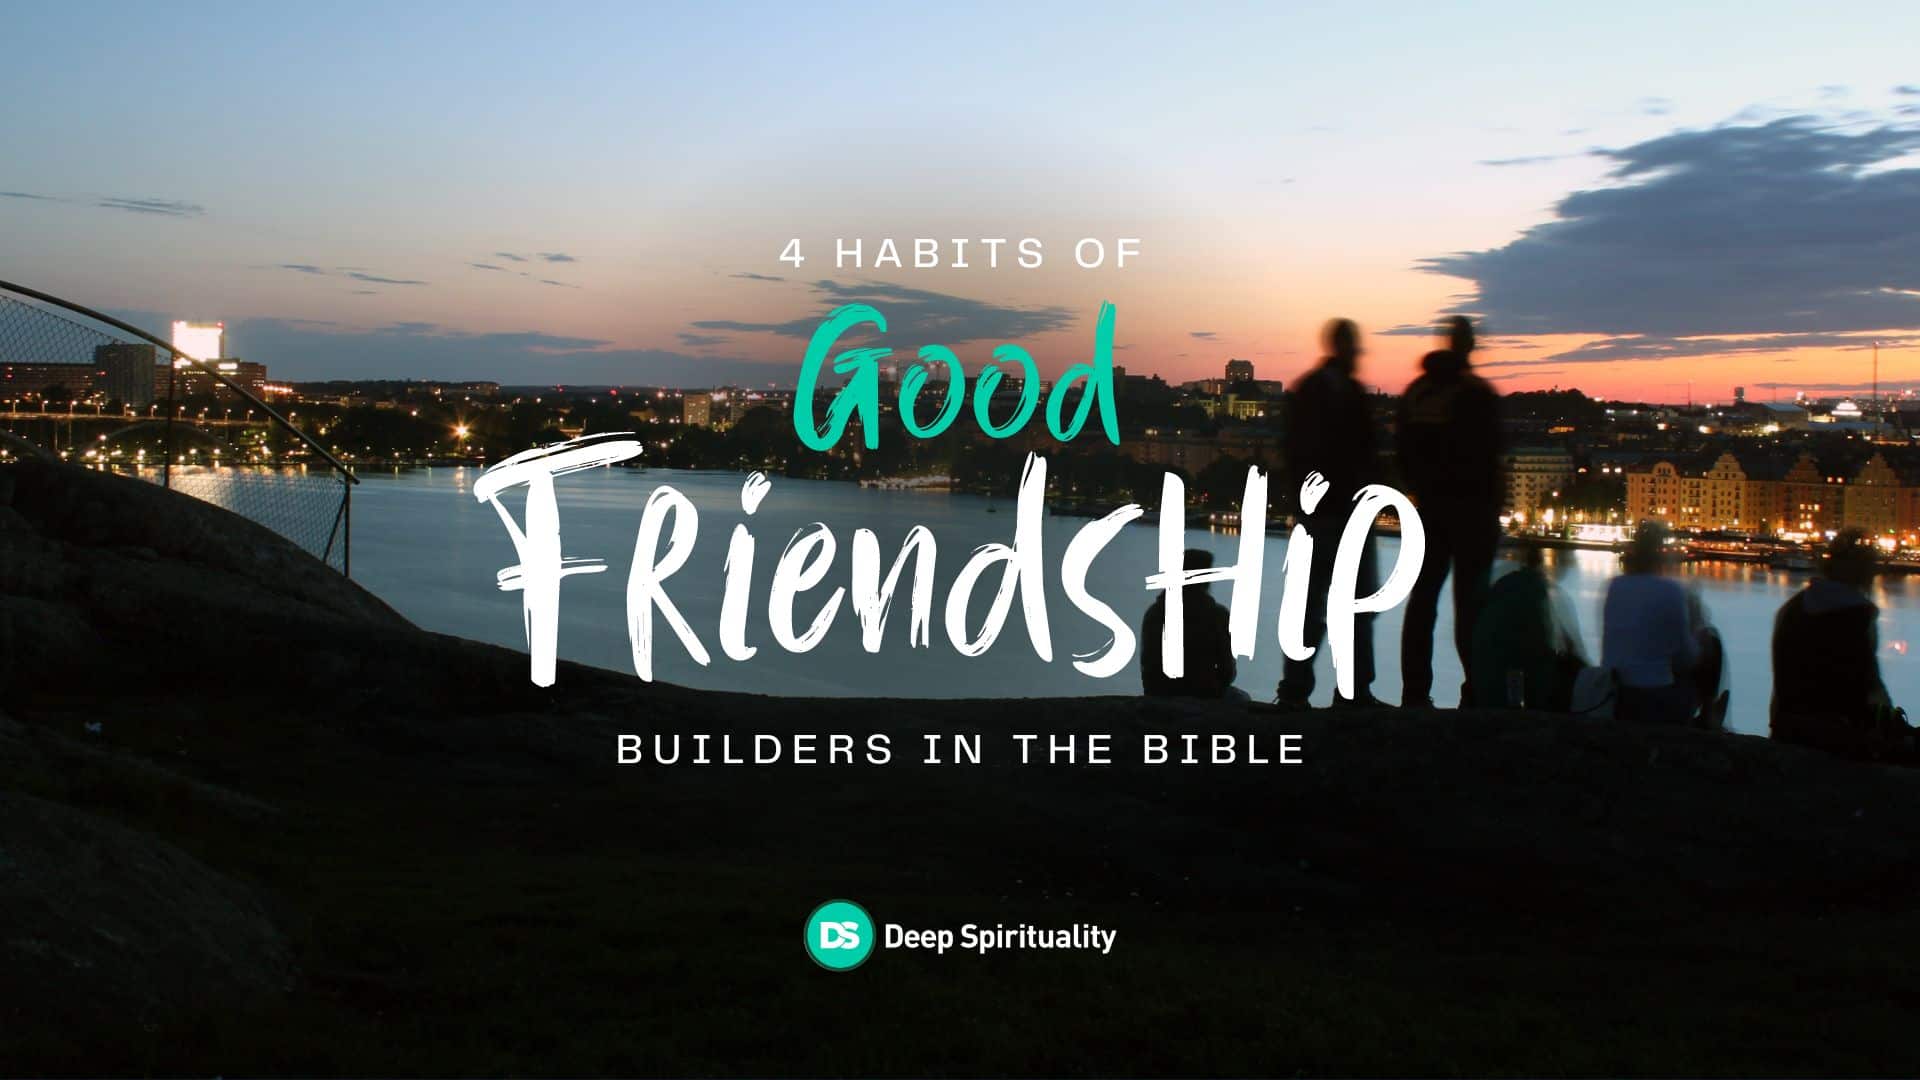 4 Habits to Build if You Want Good Friendships, According to the Bible 2